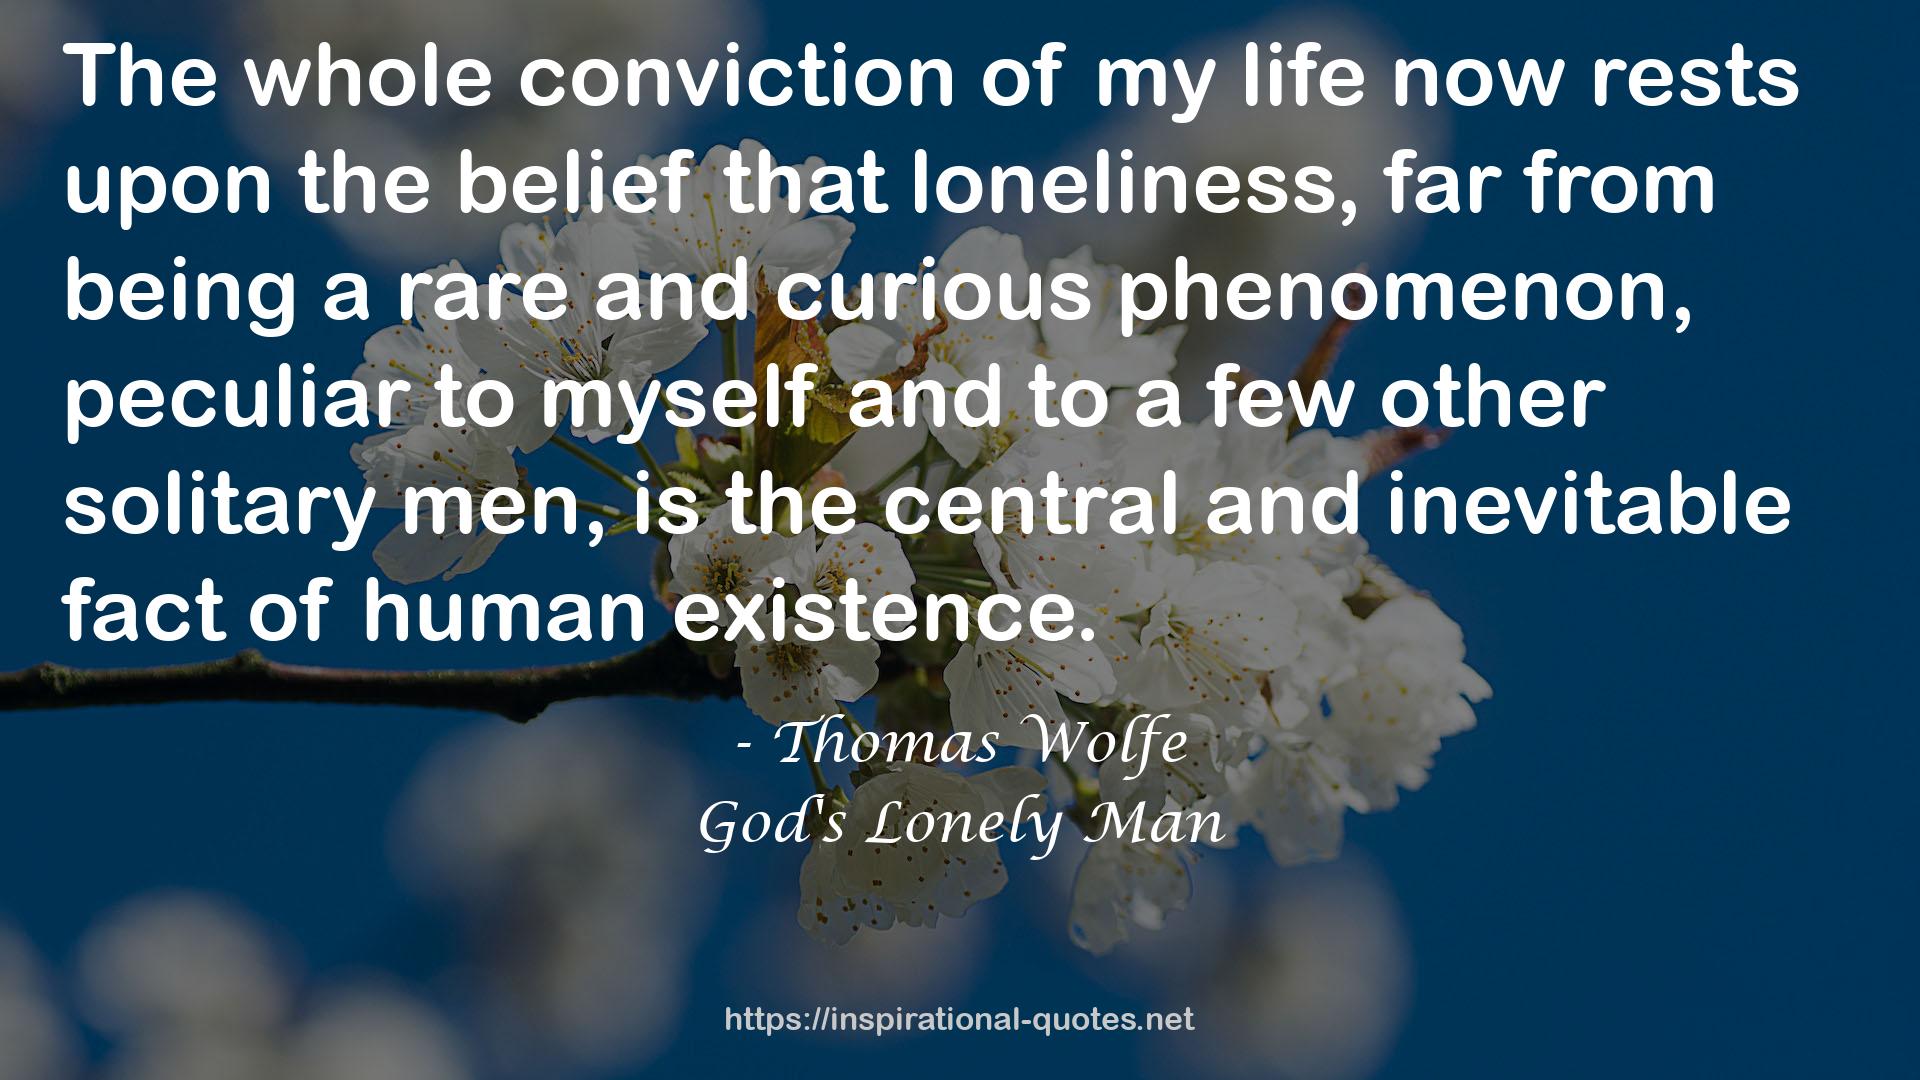 God's Lonely Man QUOTES